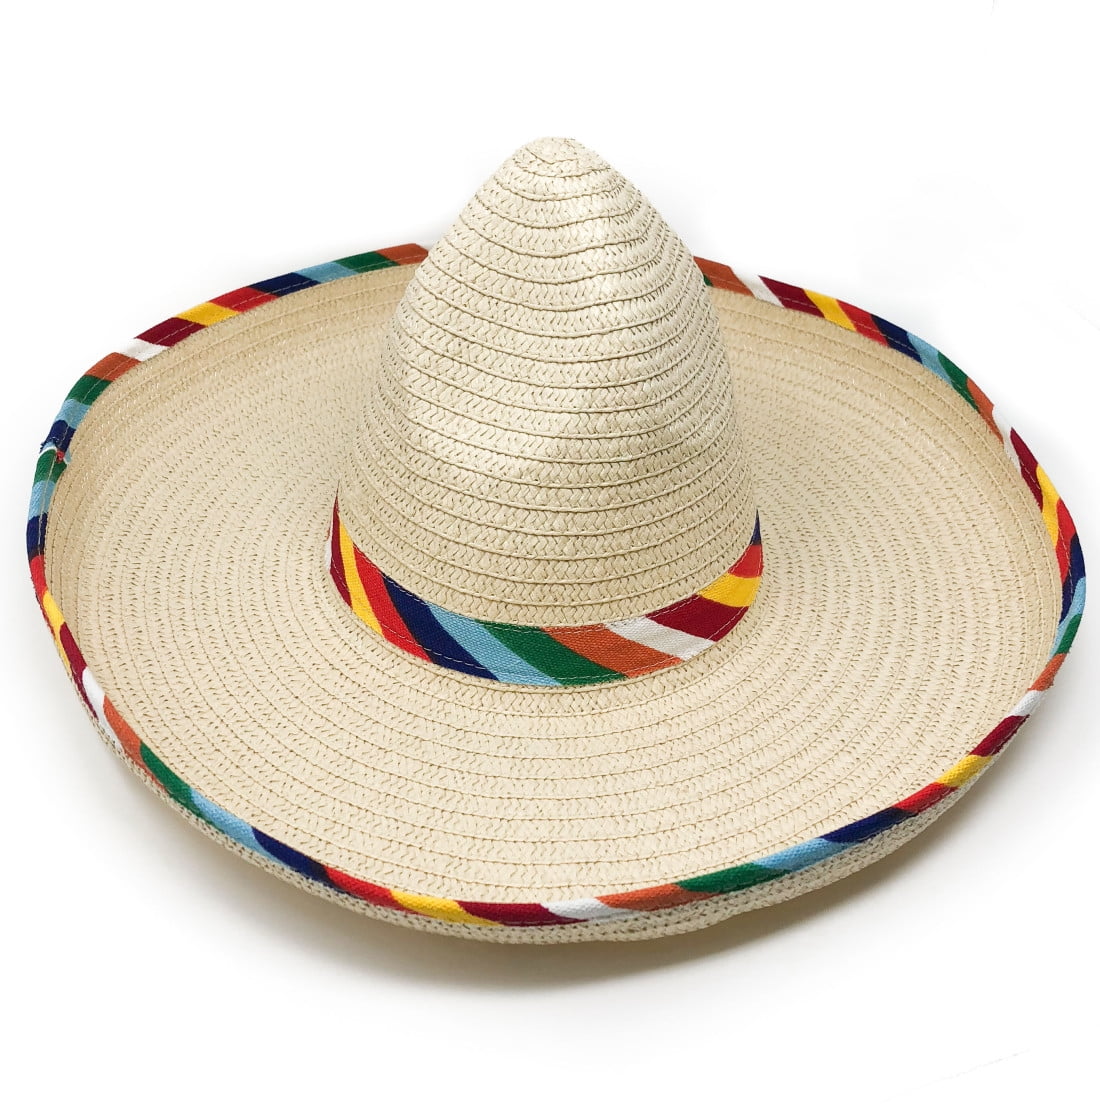 MINIATURE STRAW SOMBRERO HAT WITH SARAPE EDGE AND EMBROIDERED MEXICO 